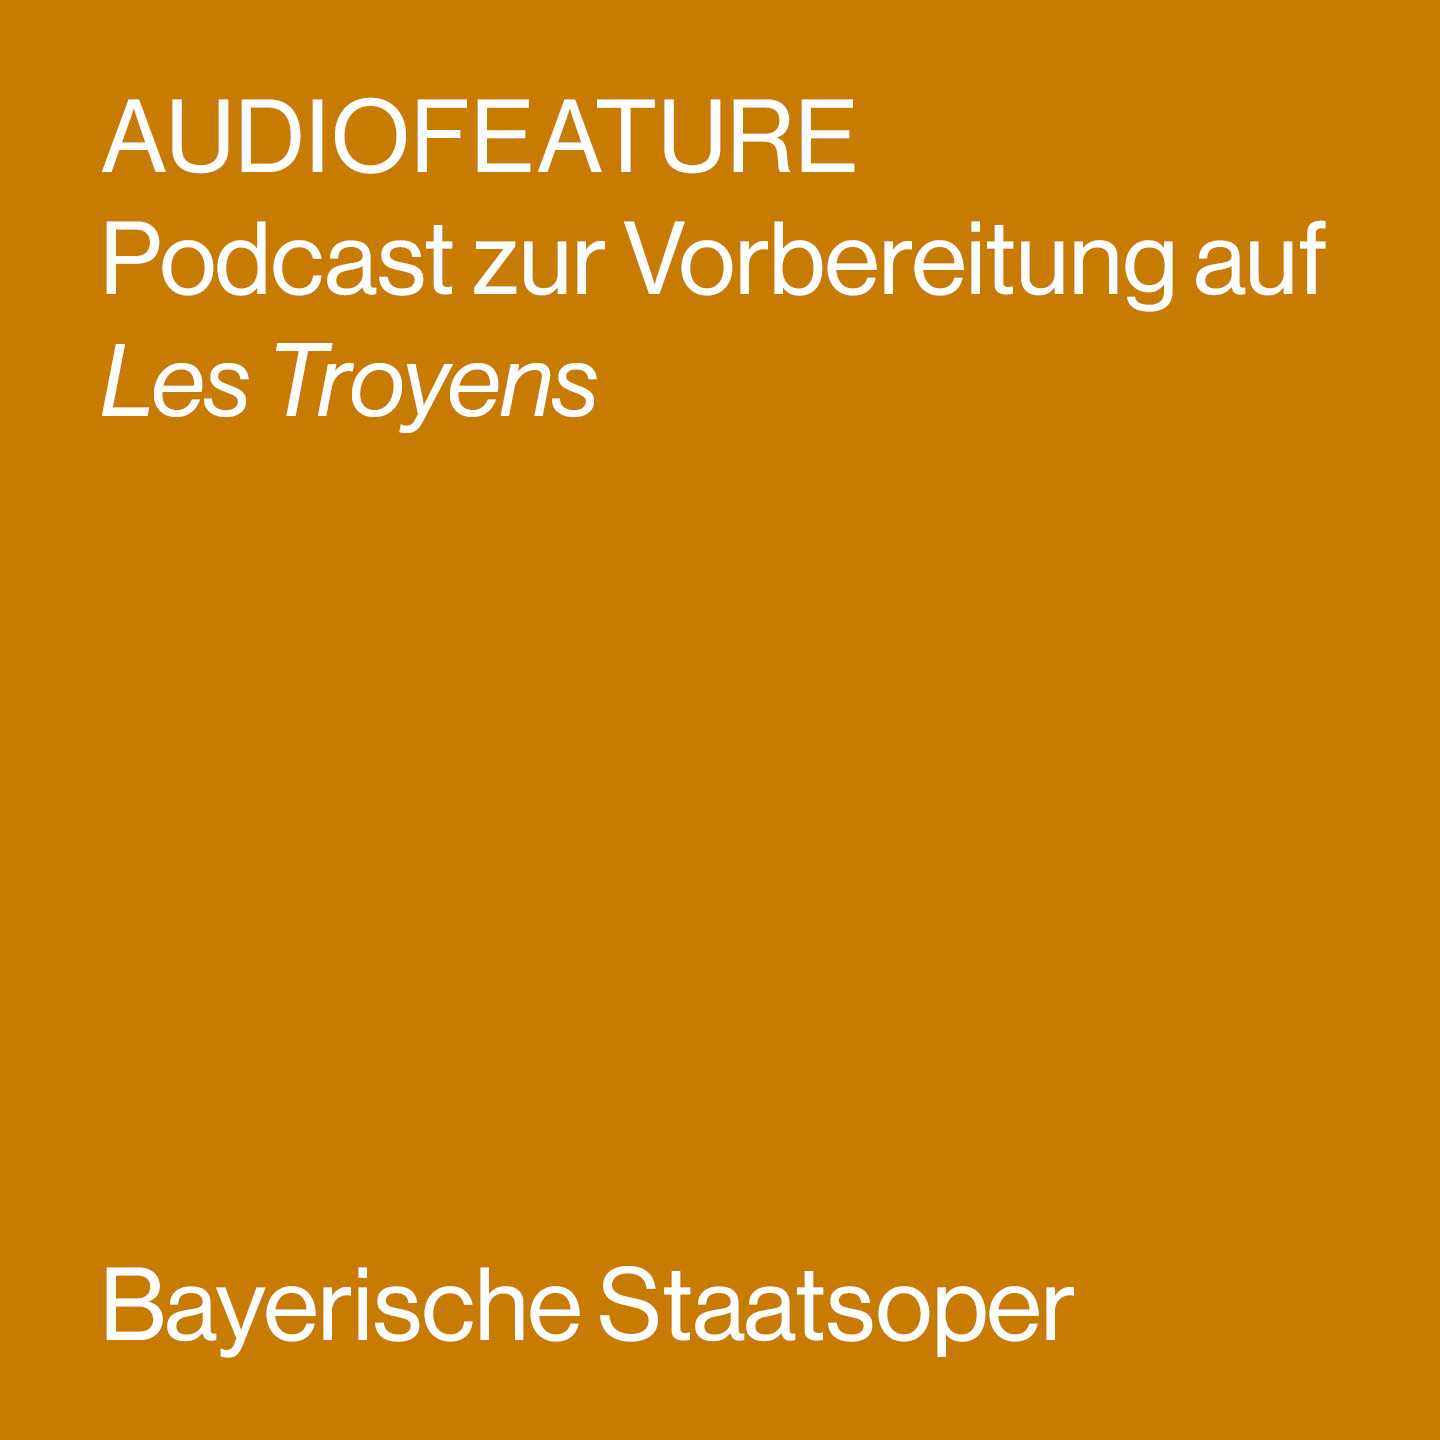 AUDIOFEATURE zu LES TROYENS